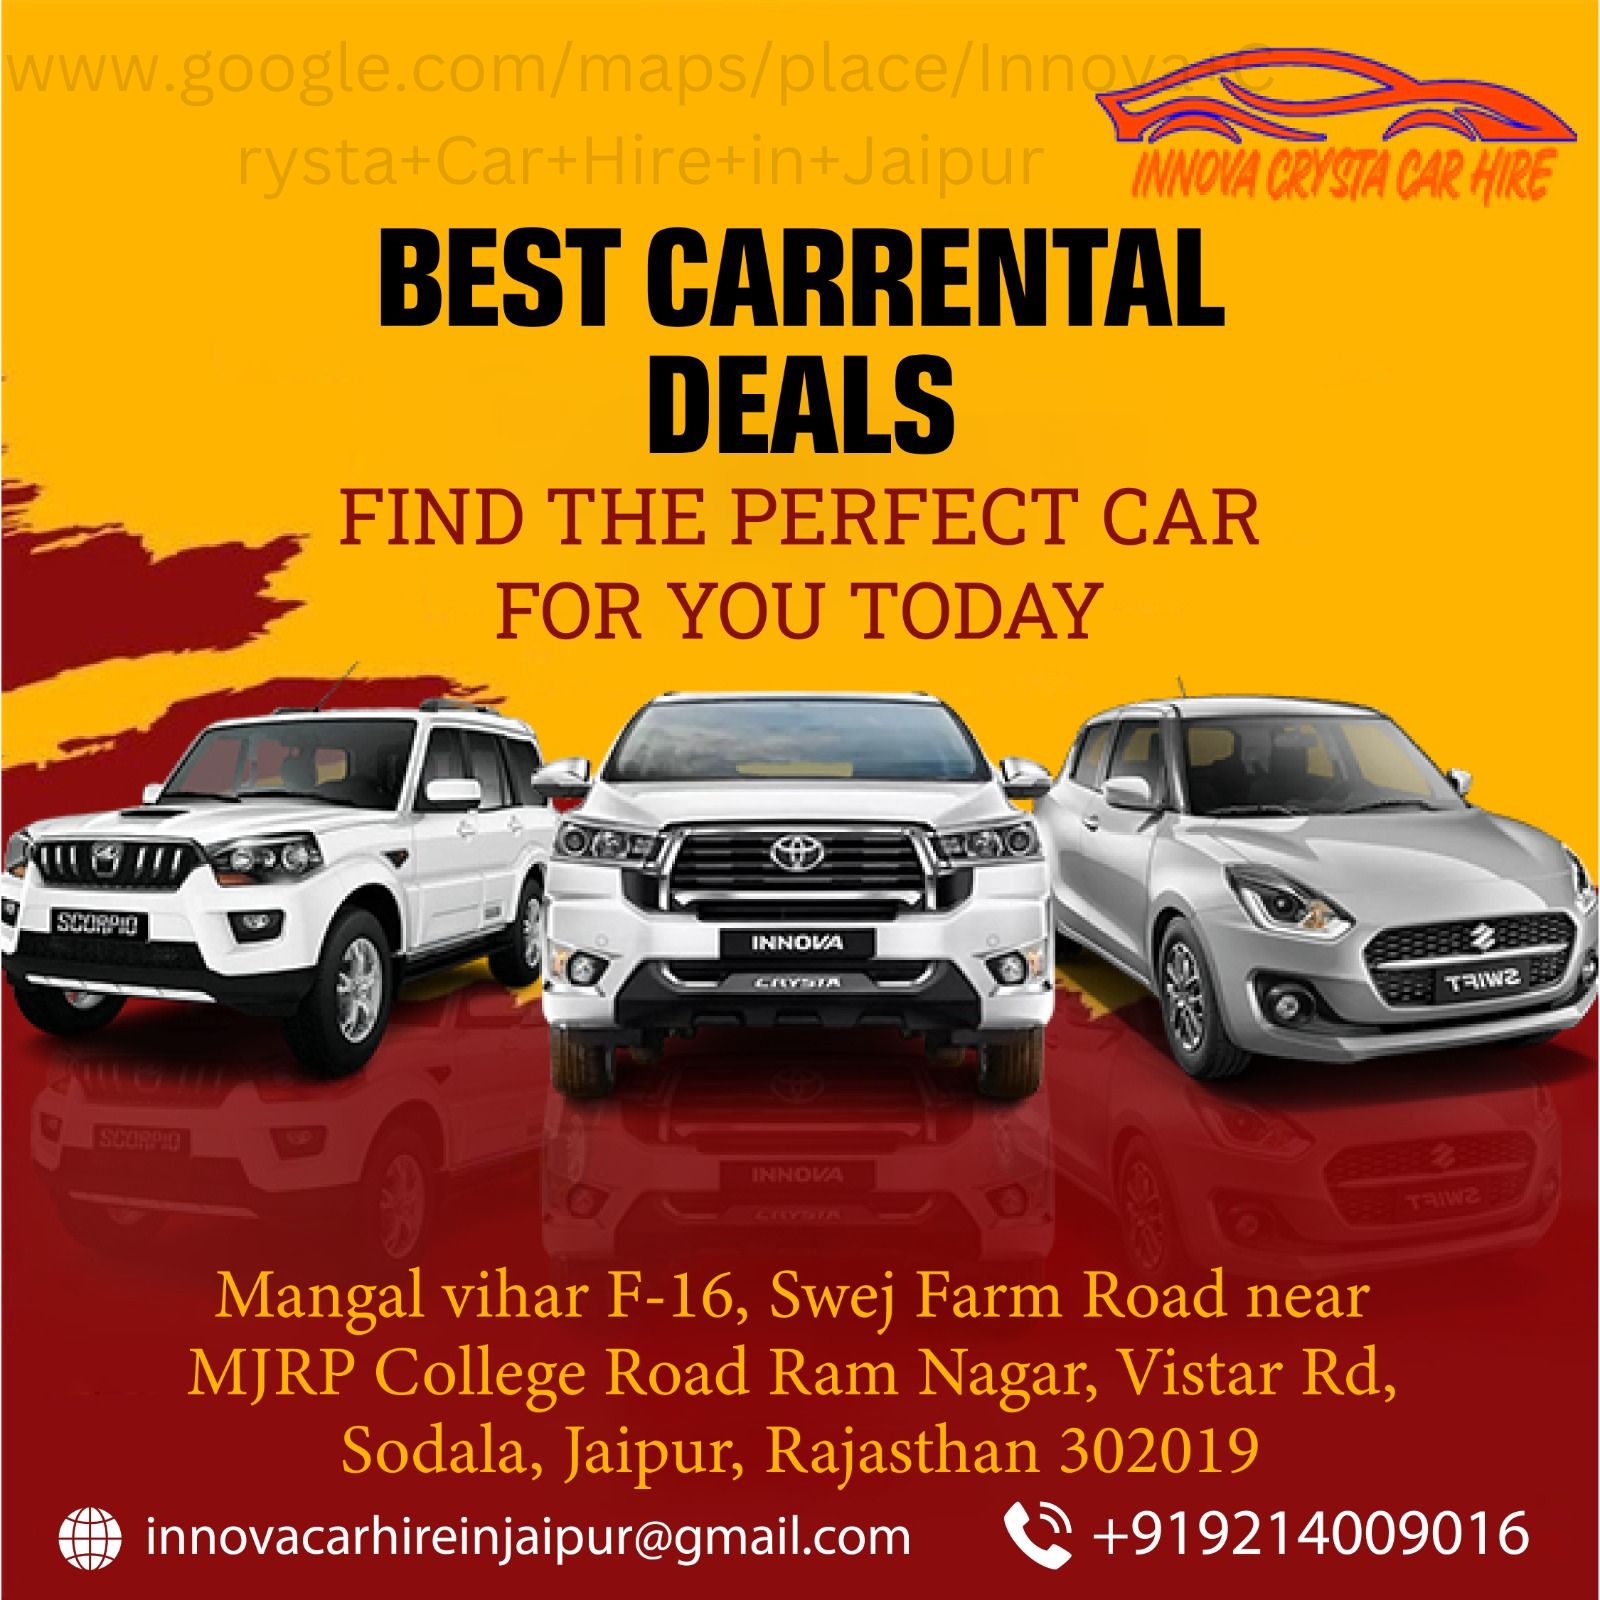 Innova Crysta car rental in Jaipur. Best service, anytime booking for your convenience.